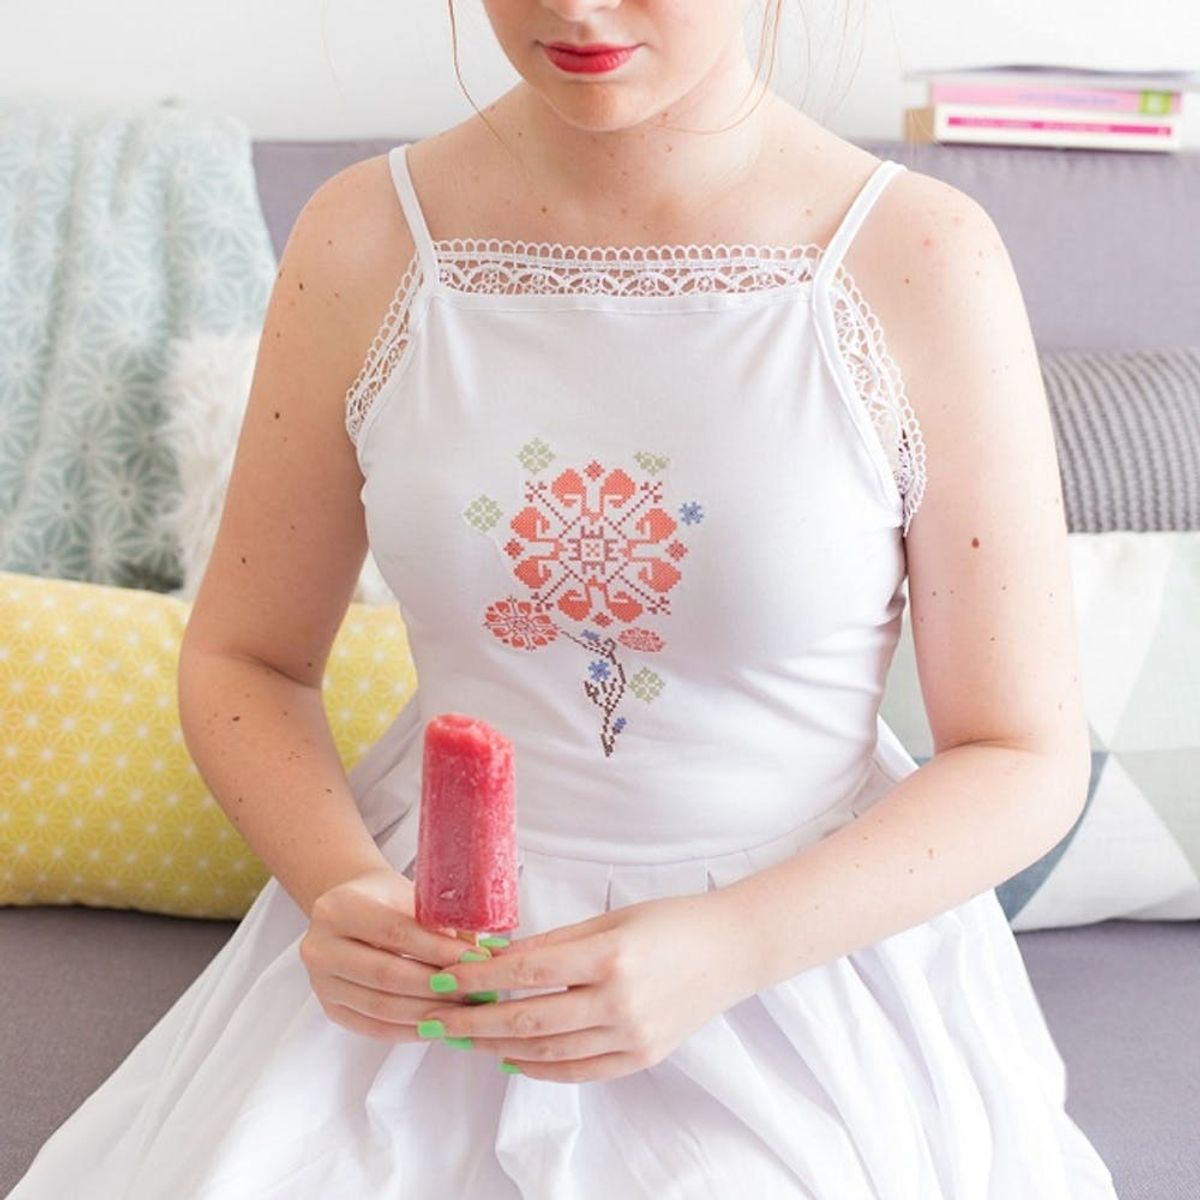 DIY Copycat: Create This Urban Outfitters Embroidery Dress for a Fraction of the Price